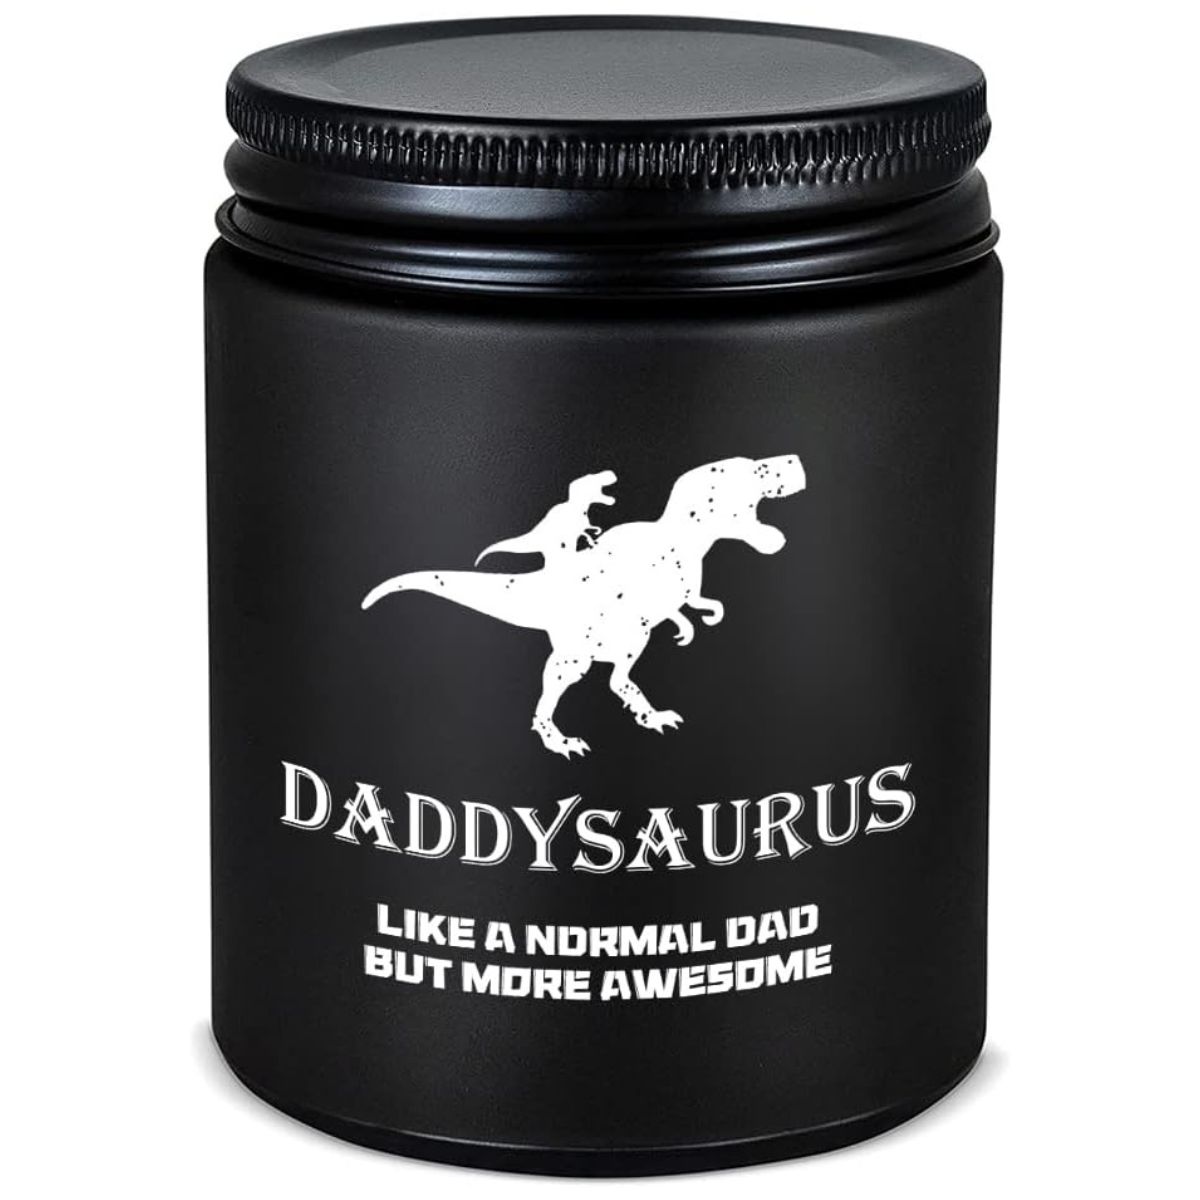 Charming Daddysaurus Scented Candle for Father&#x27;s Day Gift